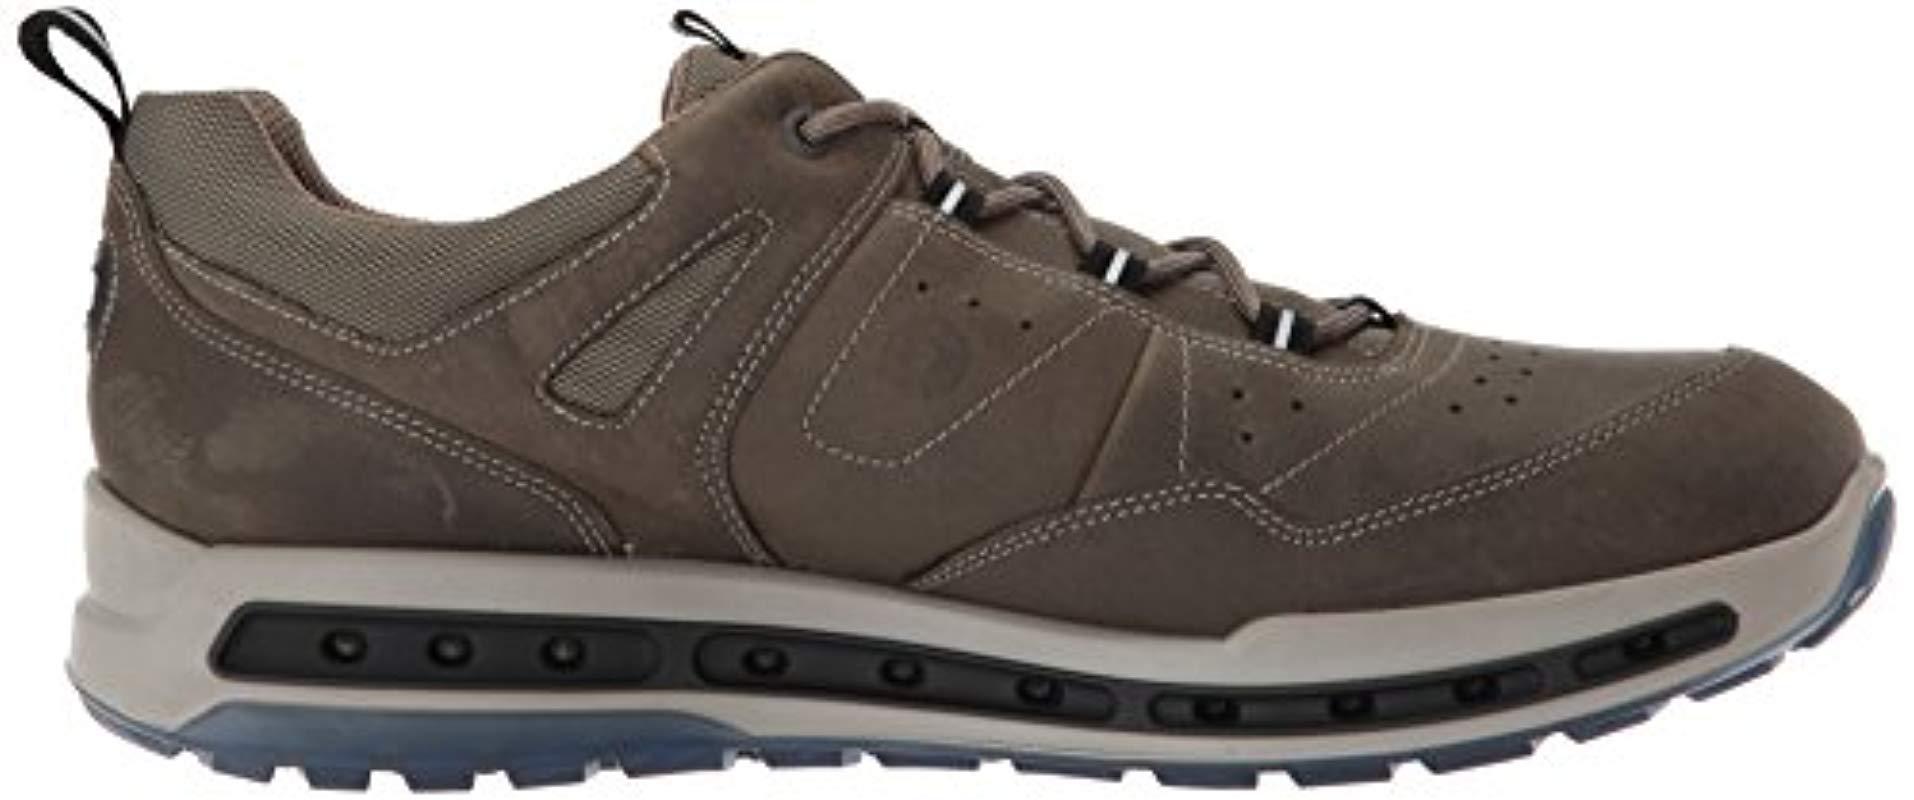 Ecco Leather Cool Walk Hiking Shoe for Men - Lyst